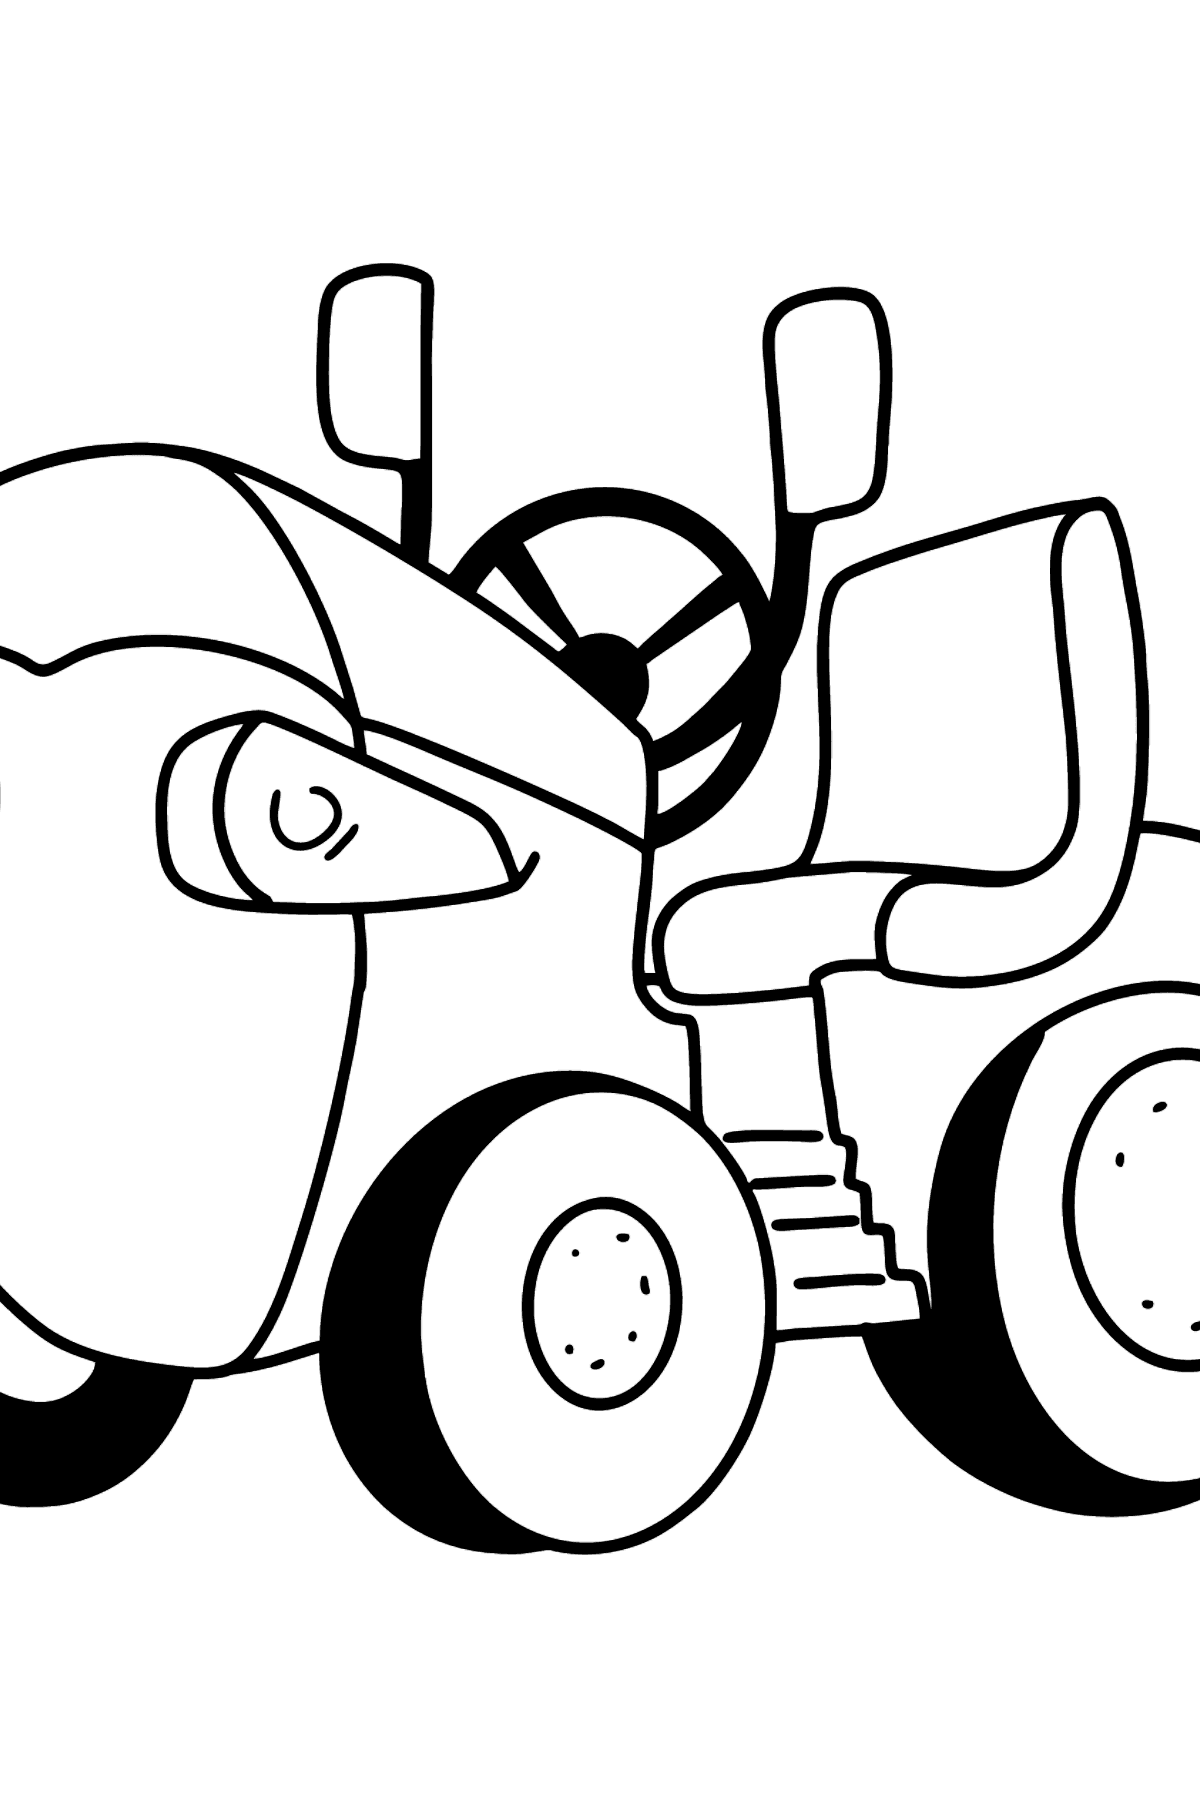 T-15 Mini Tractor Fighter coloring page - Coloring Pages for Kids